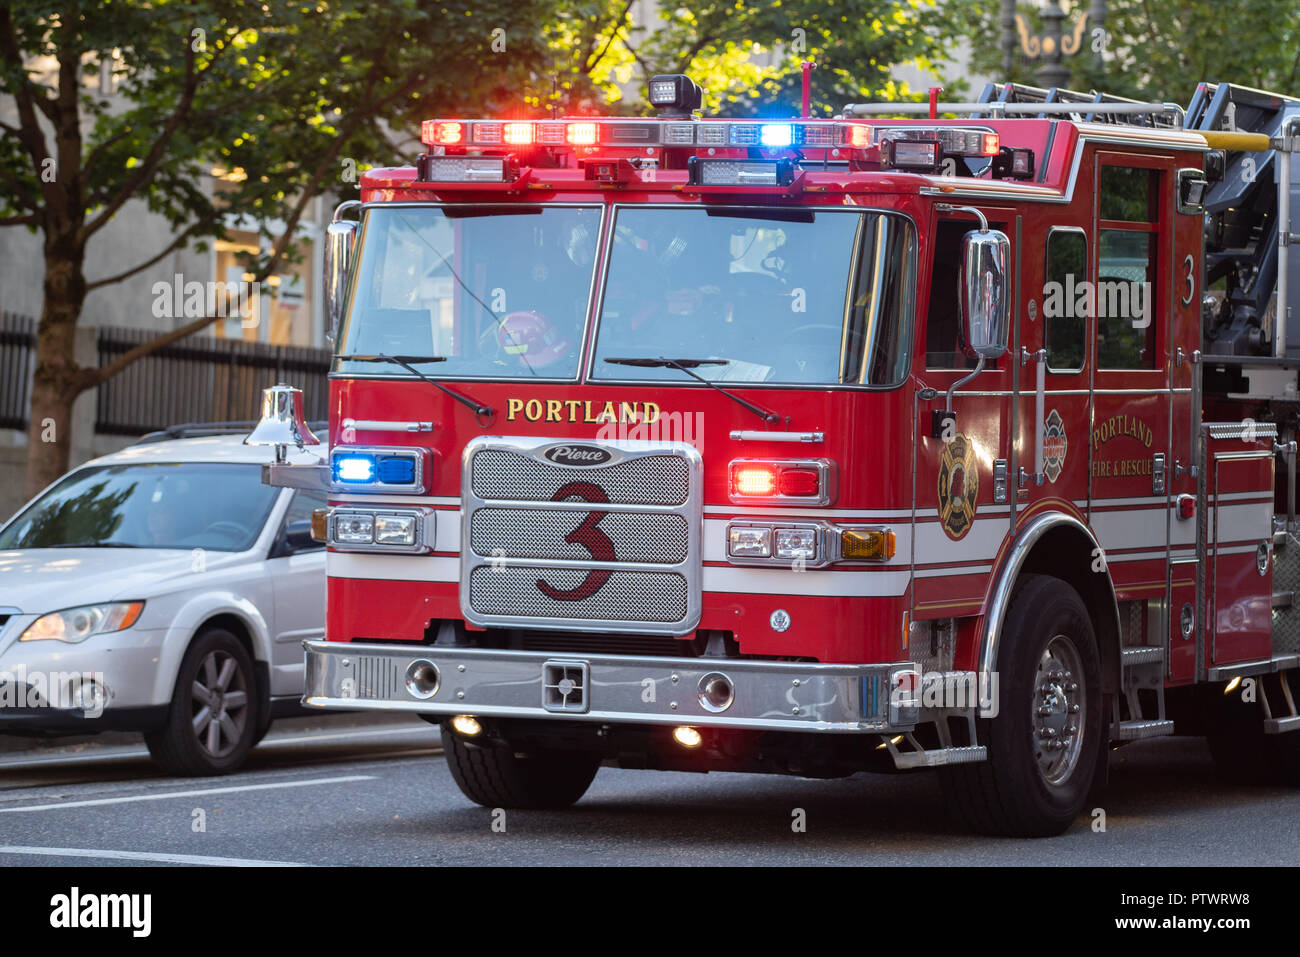 Portland, OR / USA - July 11 2018: Firefighter truck with sirens on stopped on the street in downtown Stock Photo